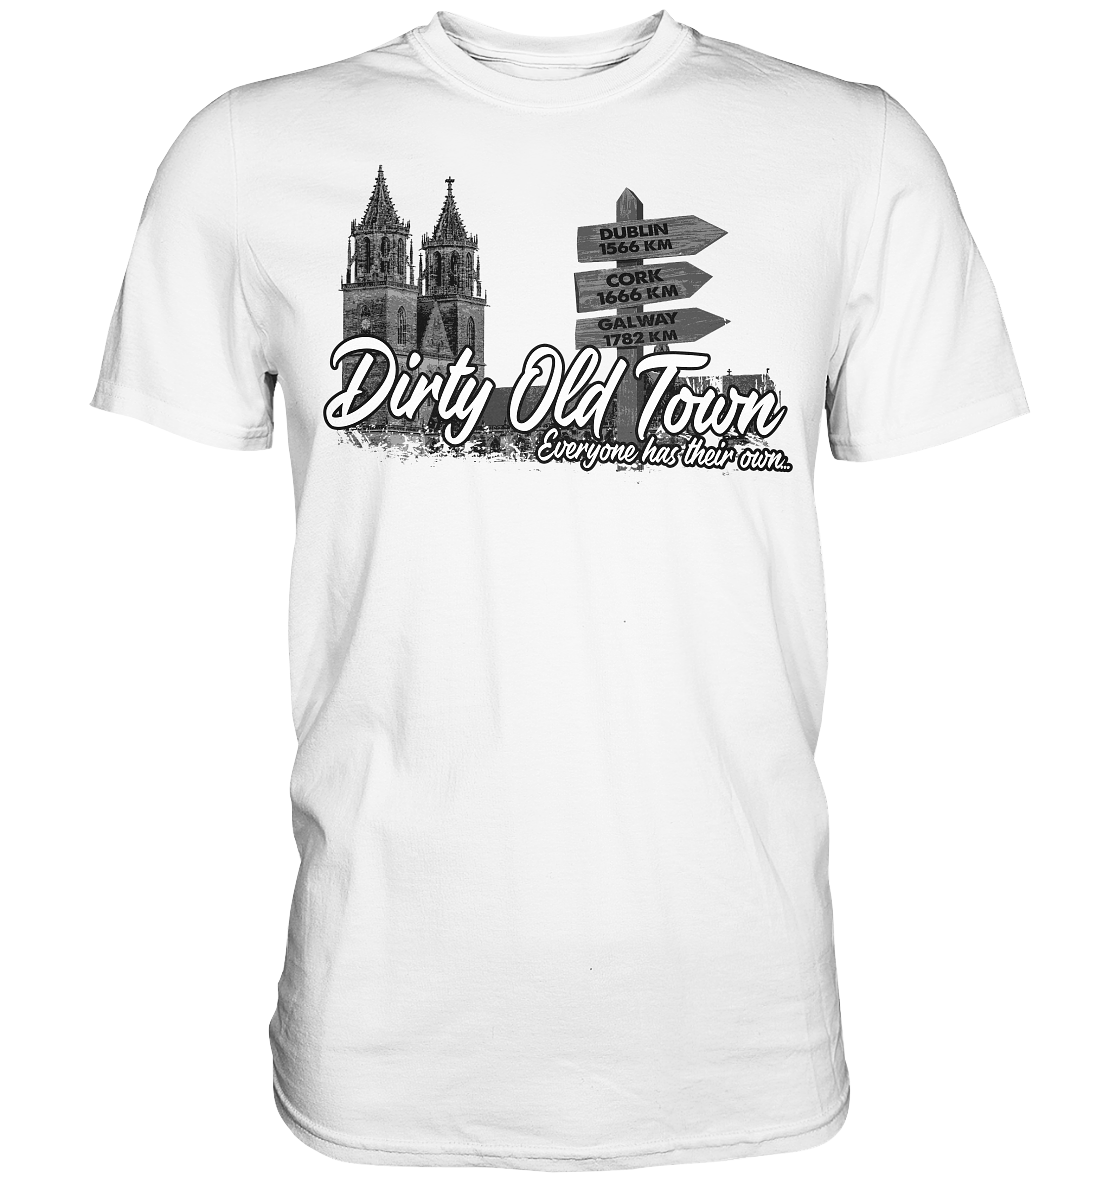 Dirty Old Town "Everyone Has Their Own" (Magdeburg) - Premium Shirt